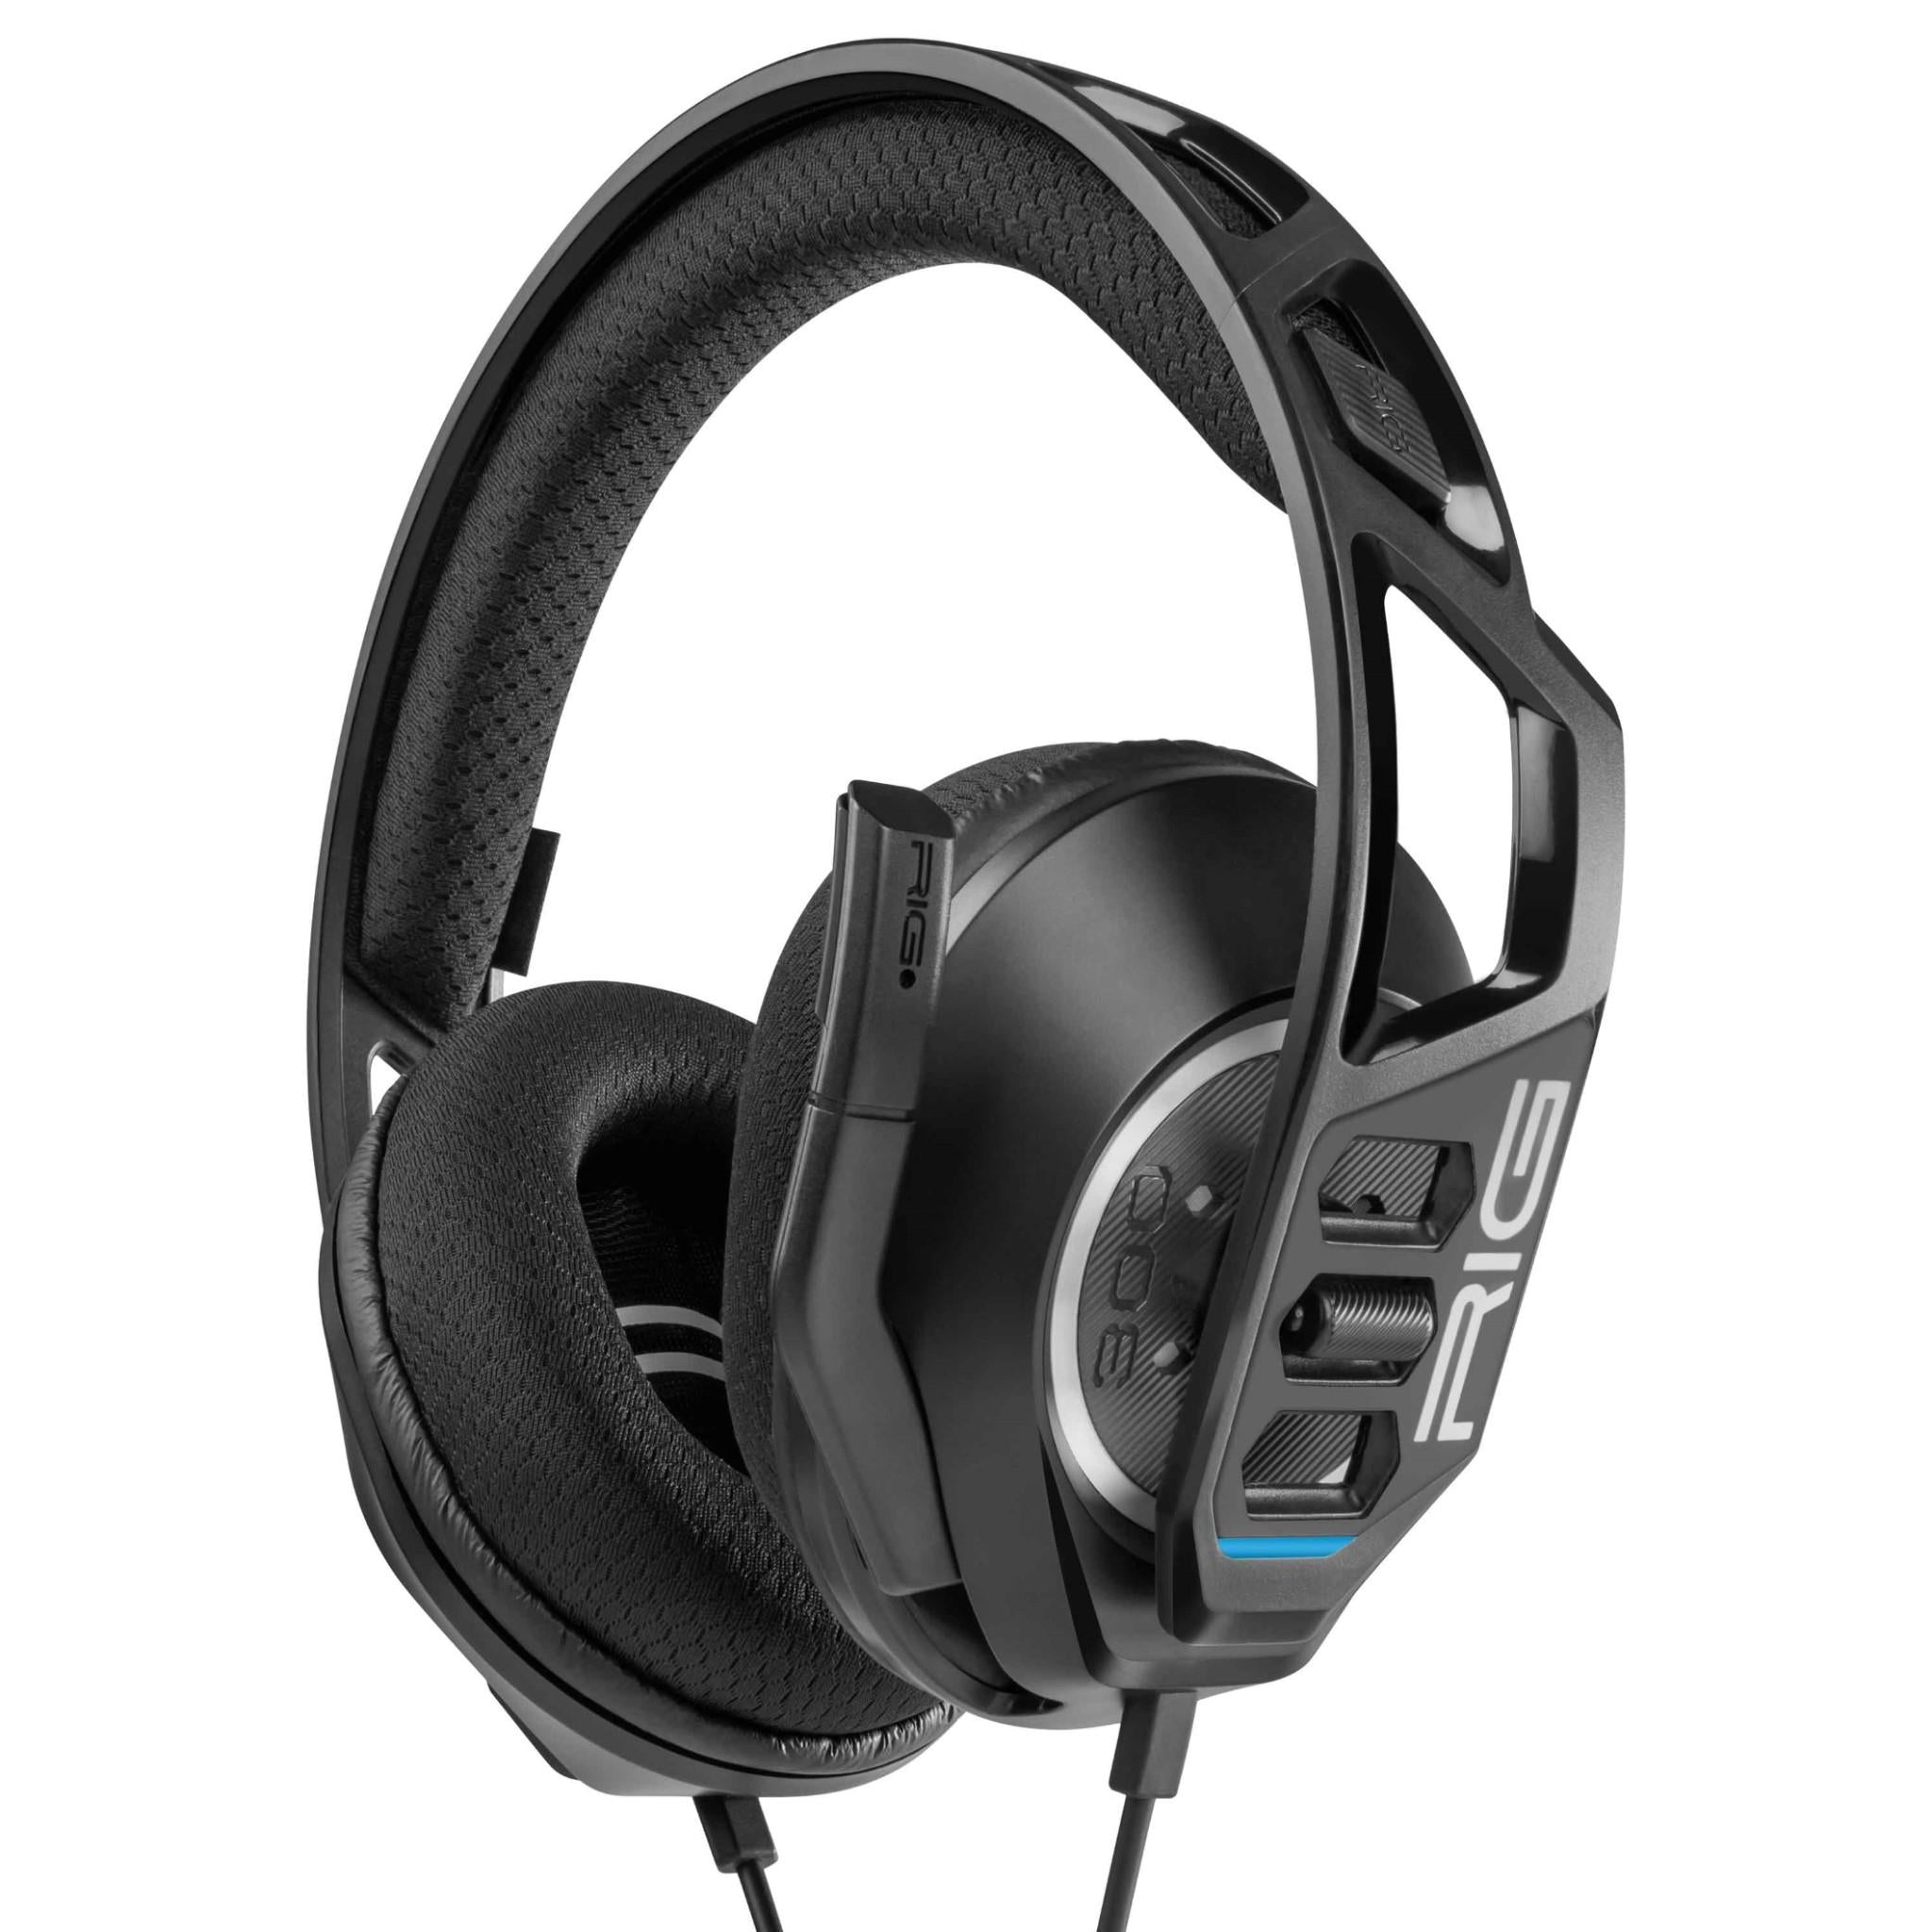 rig 300 pro hc dolby atmos gaming headset for pc (black)